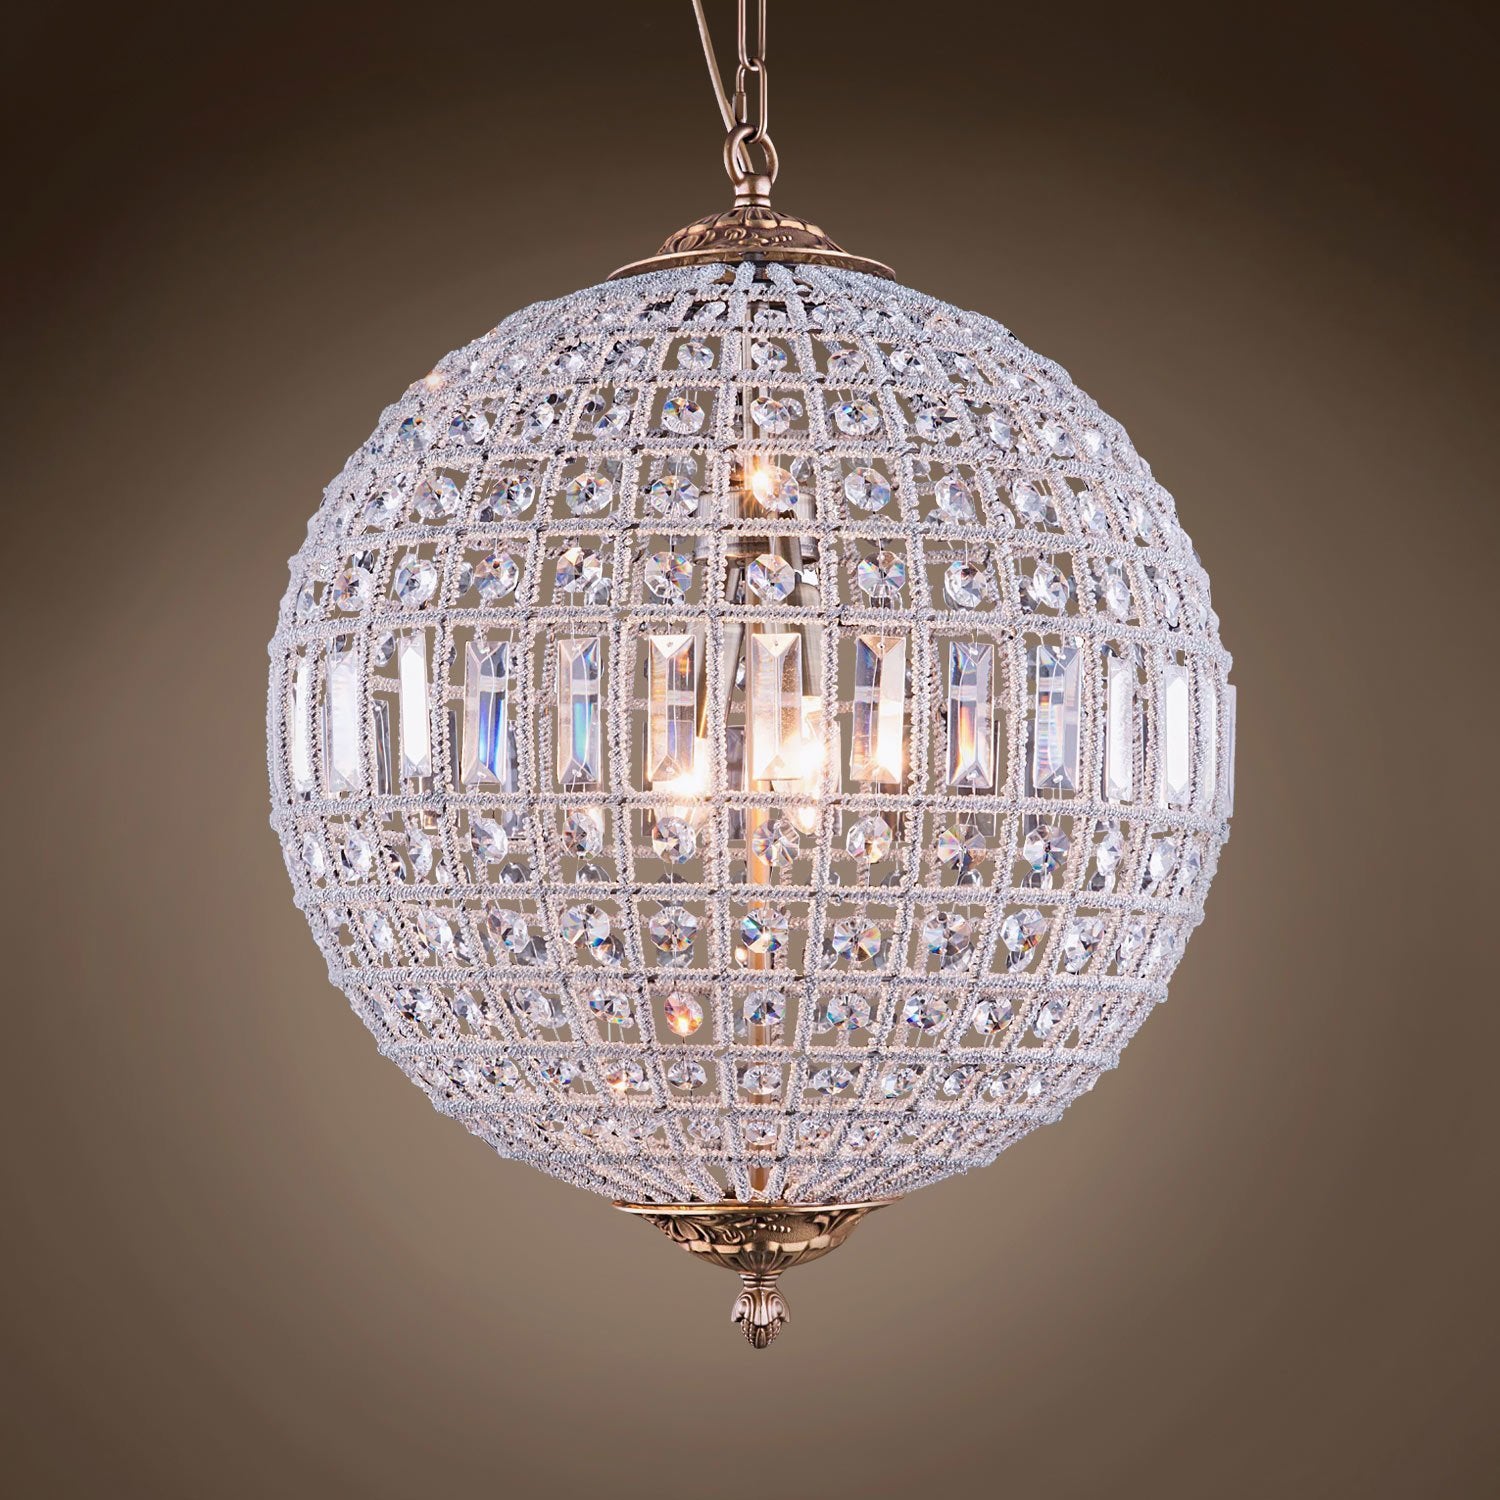 French Empire Round Sphere Crystal Chandelier - Italian Concept